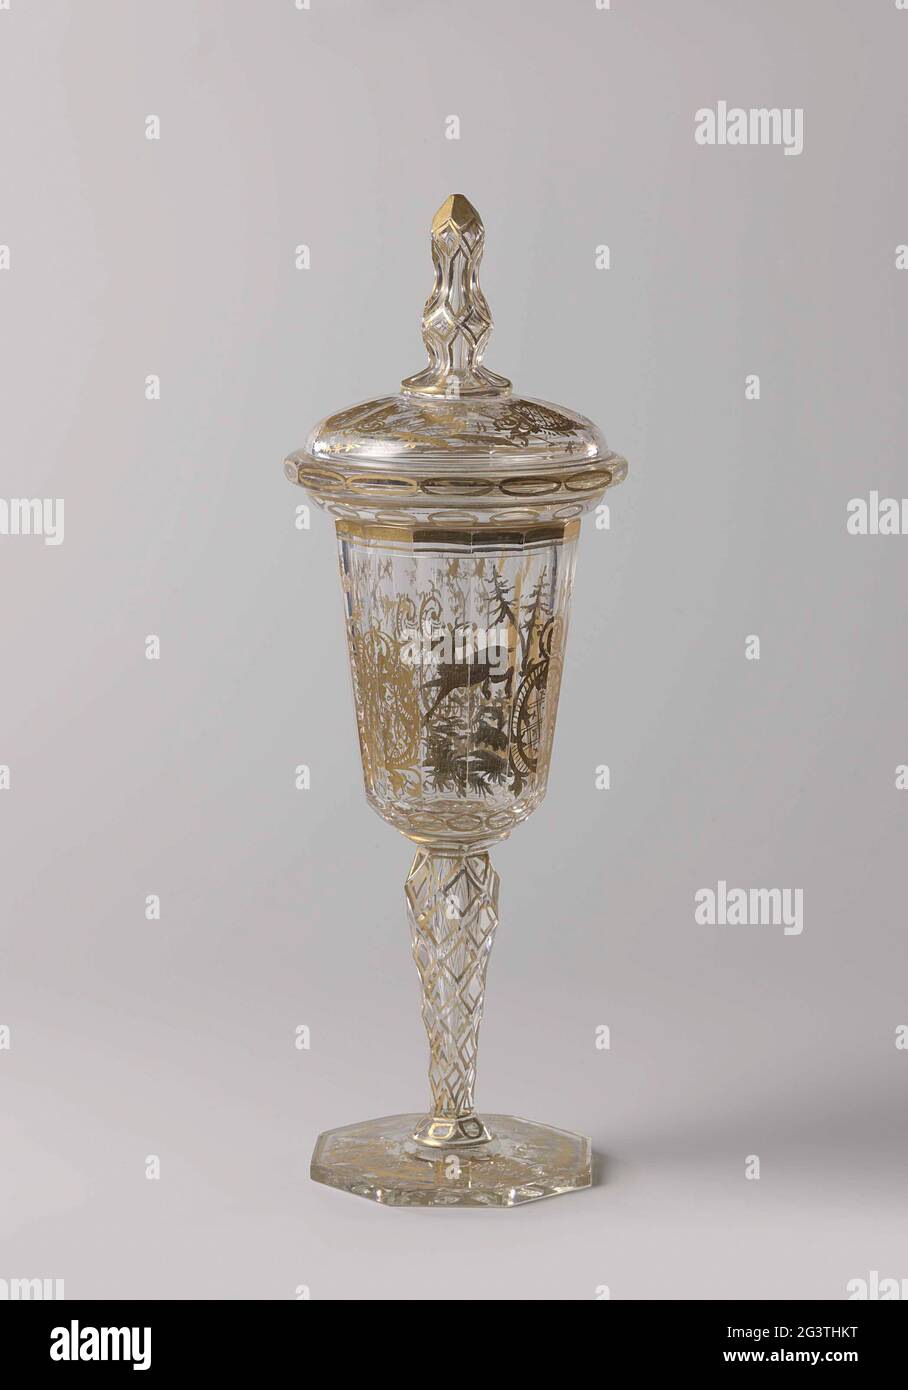 Cup with lid, with a yacht scene. Flat, octagonal, facet cut foot. Facet cut, baluster-shaped strain. Funnel-shaped, rounded and faceted chalice. Facet cut, vaulted lid with overrunning edge and a facet cut, baluster-shaped button, ending in a point. On the chalice in gold a yacht scene with a hunter with a gun. At the foot and the lid a deer, a stork and a dog between Rocaille ornament. The facets on foot, trunk and knob dipped off with gold. Stock Photo